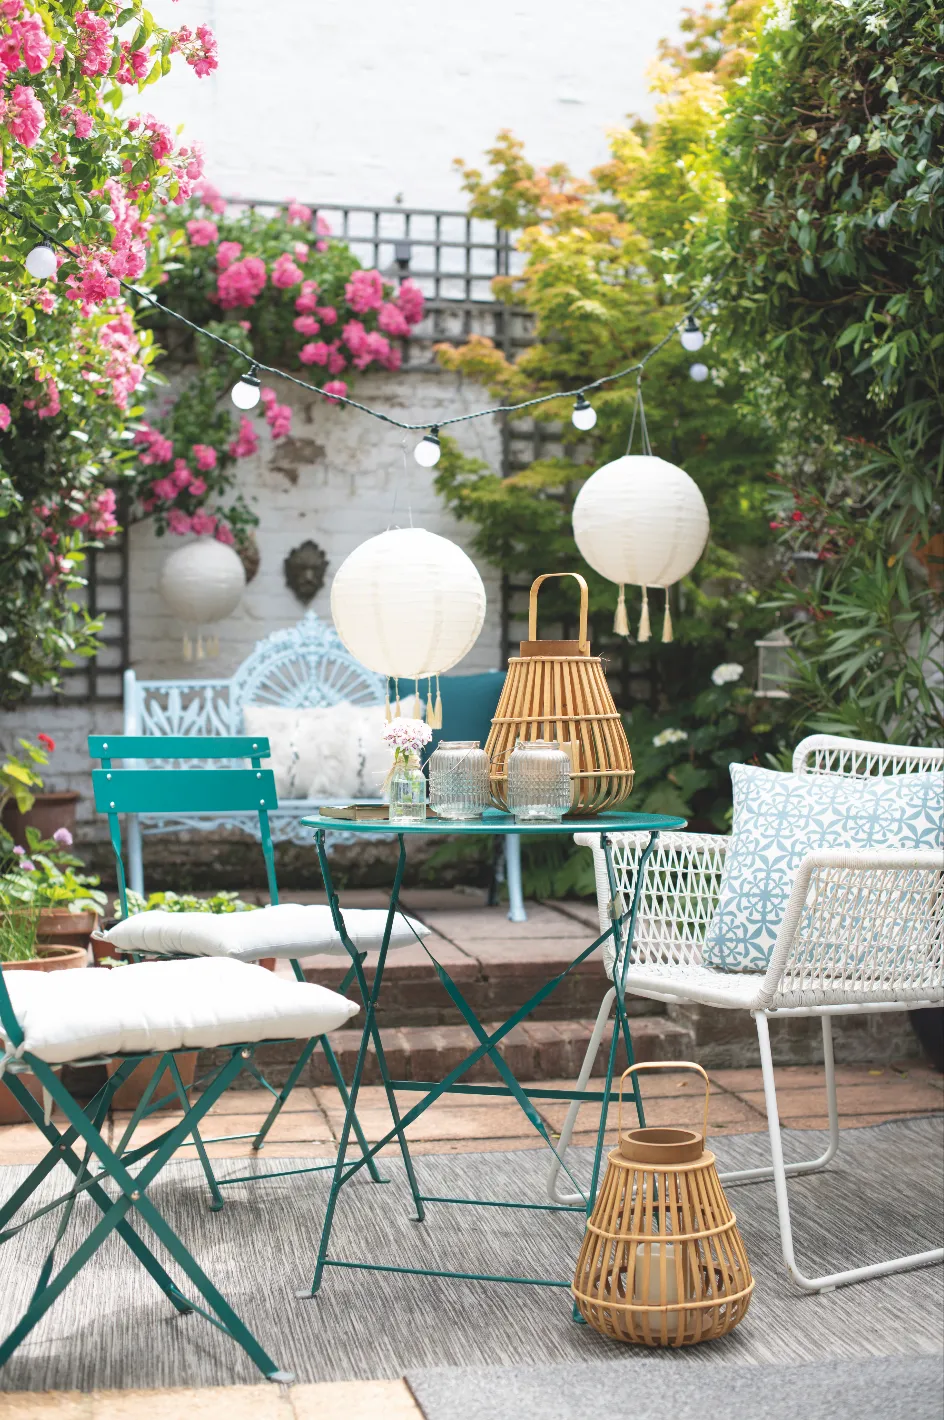 Home makeover: 'We just love our indoor-outdoor space!'